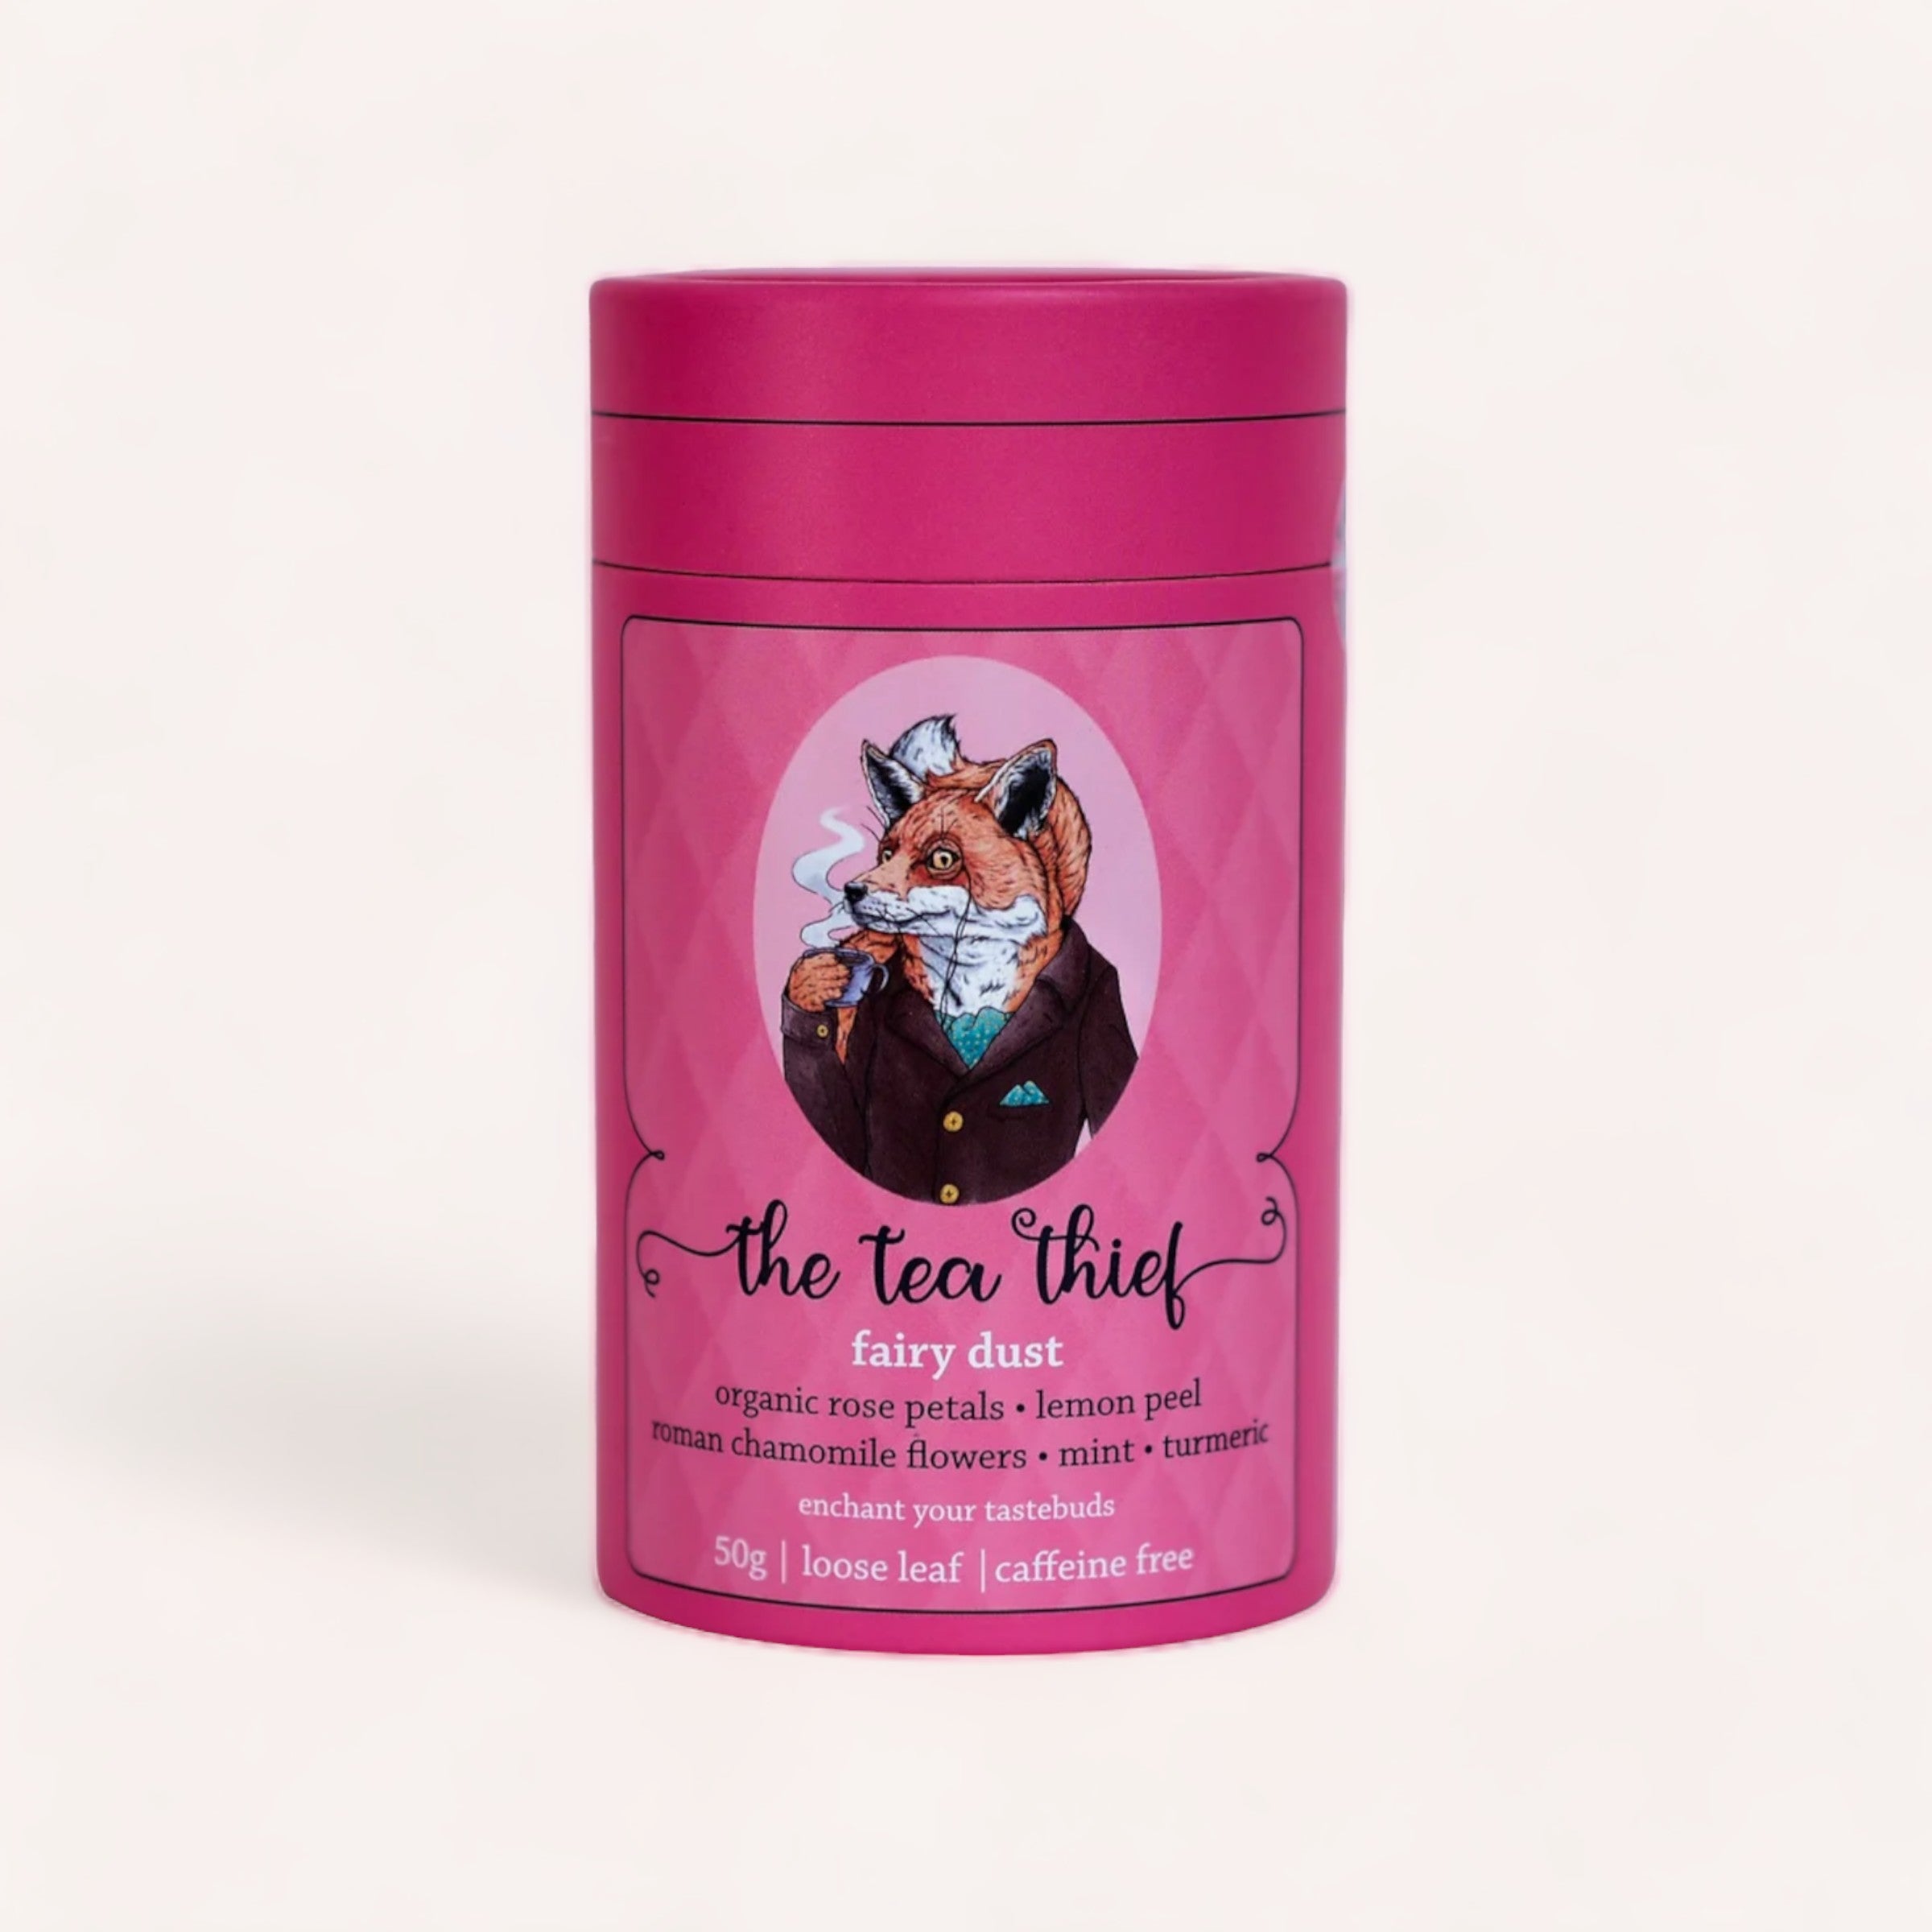 A whimsical tea tin featuring an illustration of a fox dressed in a suit, titled "Fairy Dust 50g by The Tea Thief," advertising a blend of organic rose petals, lemon peel, chamomile flowers, mint.